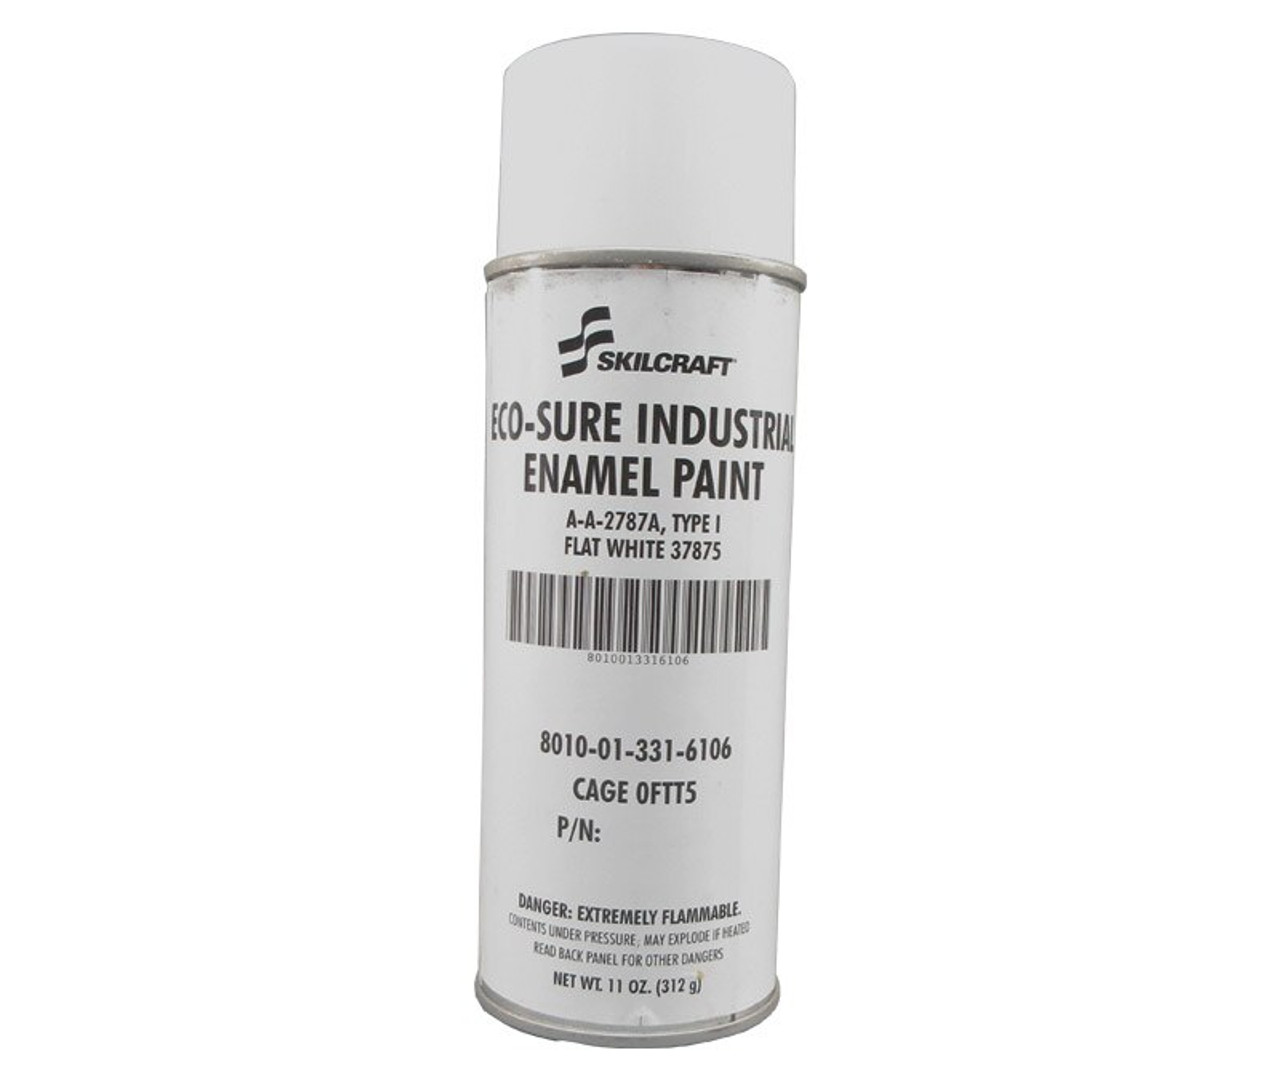 7520015889100 SKILCRAFT Paint Marker by AbilityOne® NSN5889100